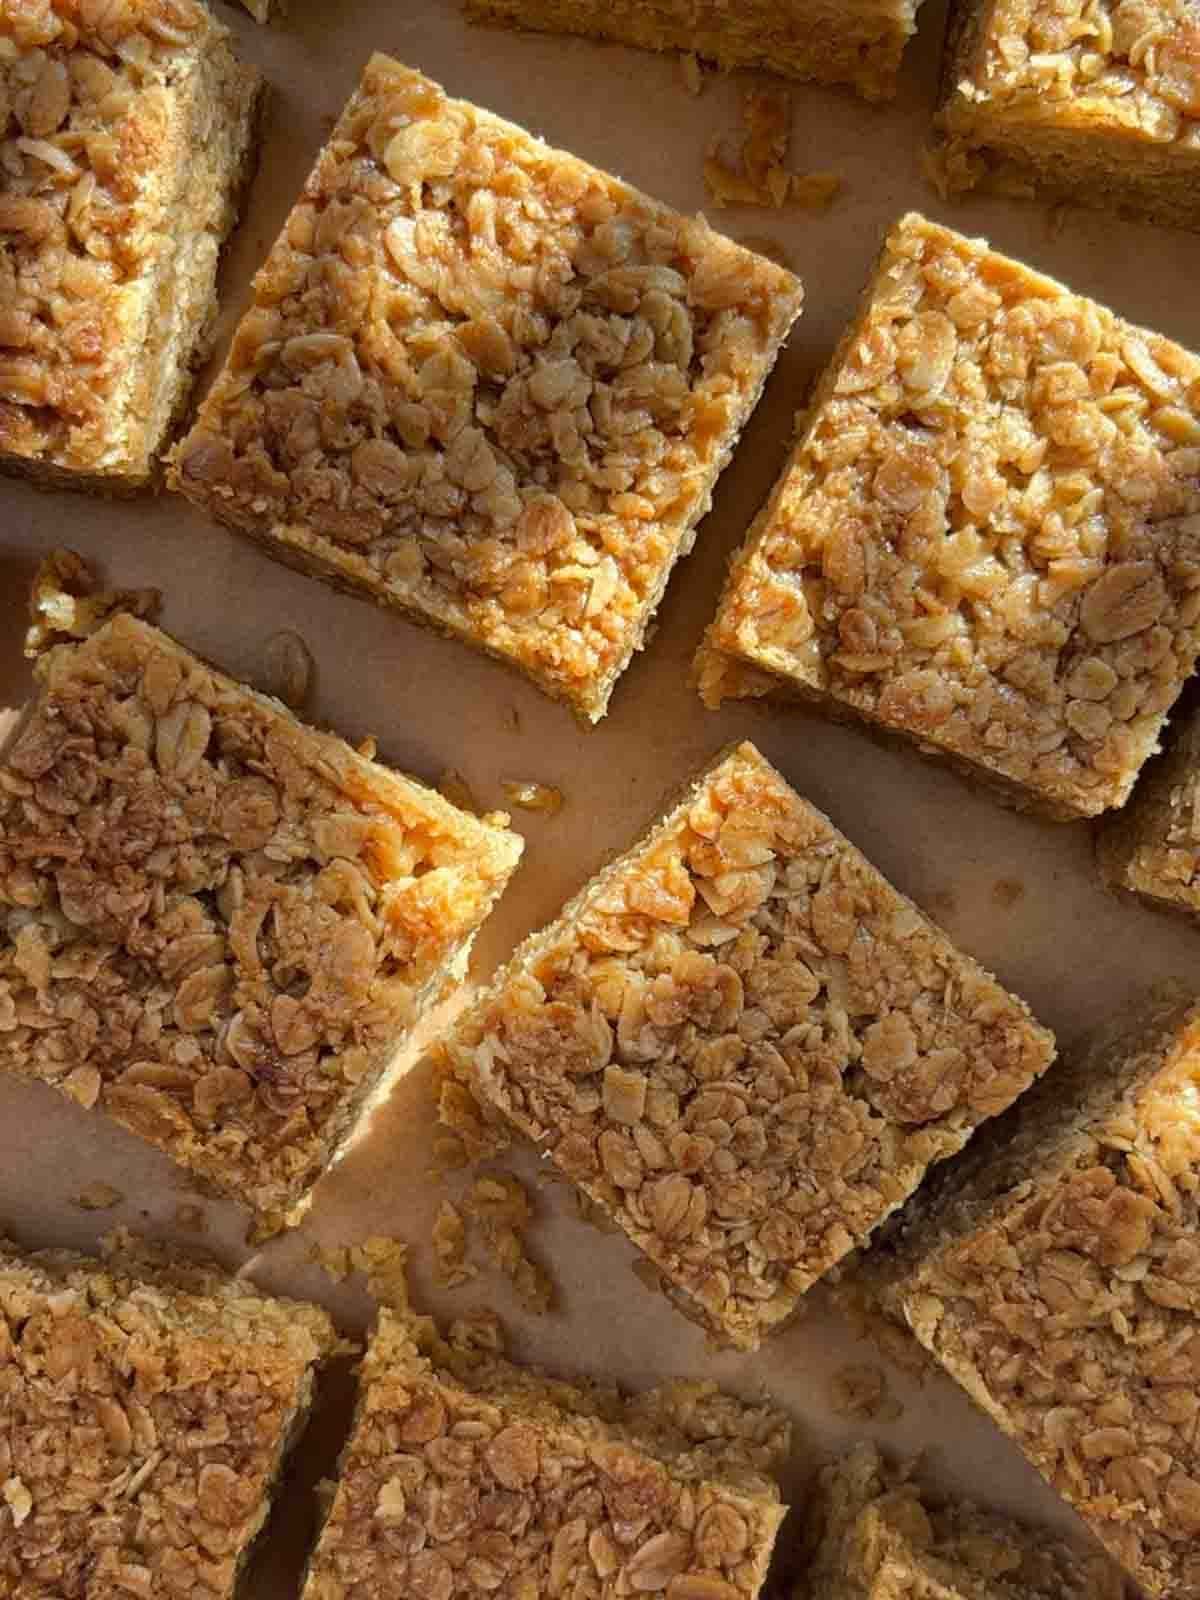 Squares of oaty flapjacks after baking.